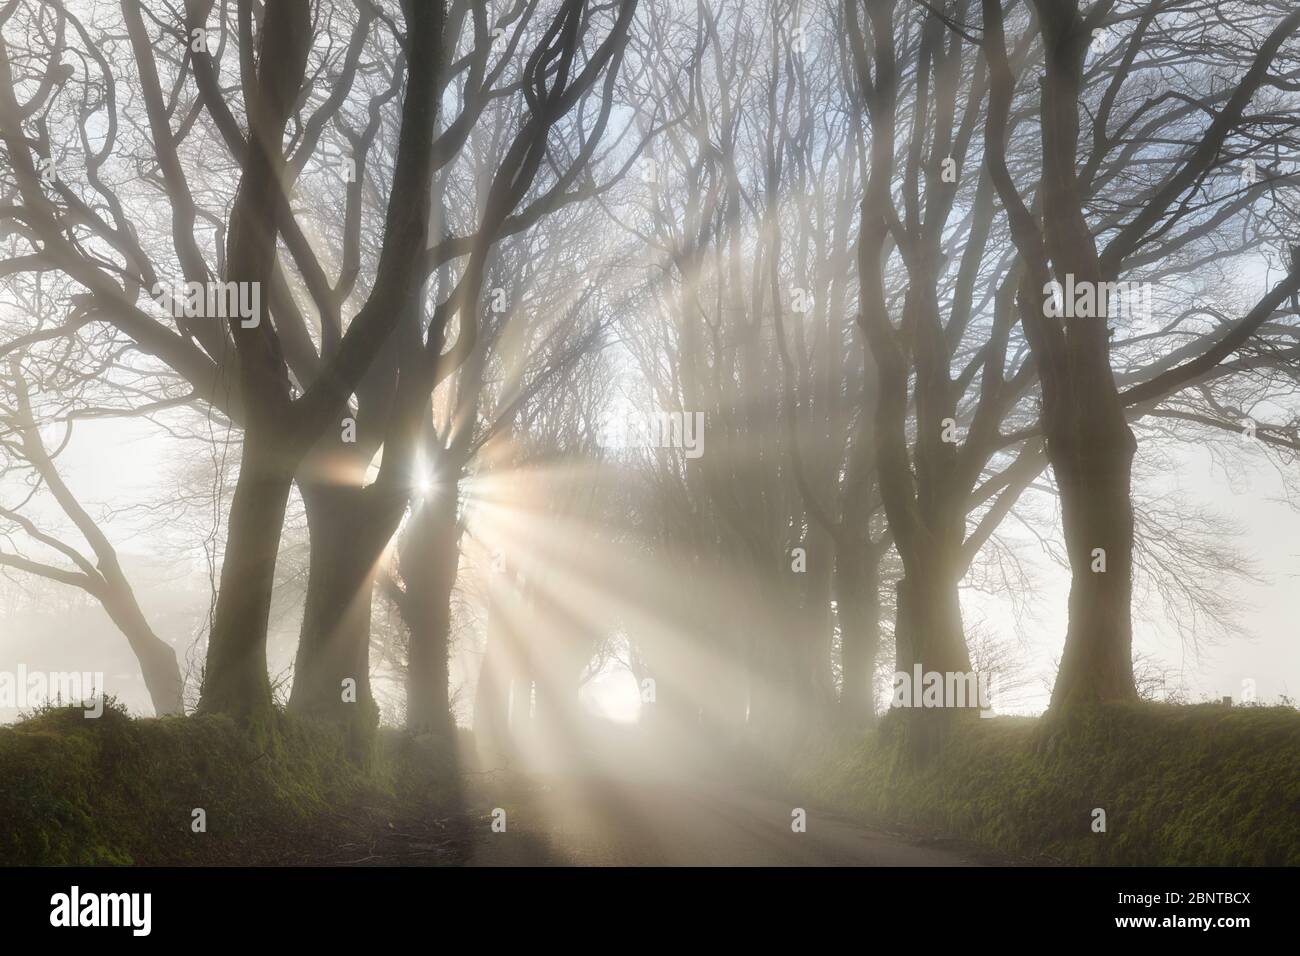 Warm morning sunlight filtering through mist along a tree lined road Stock Photo